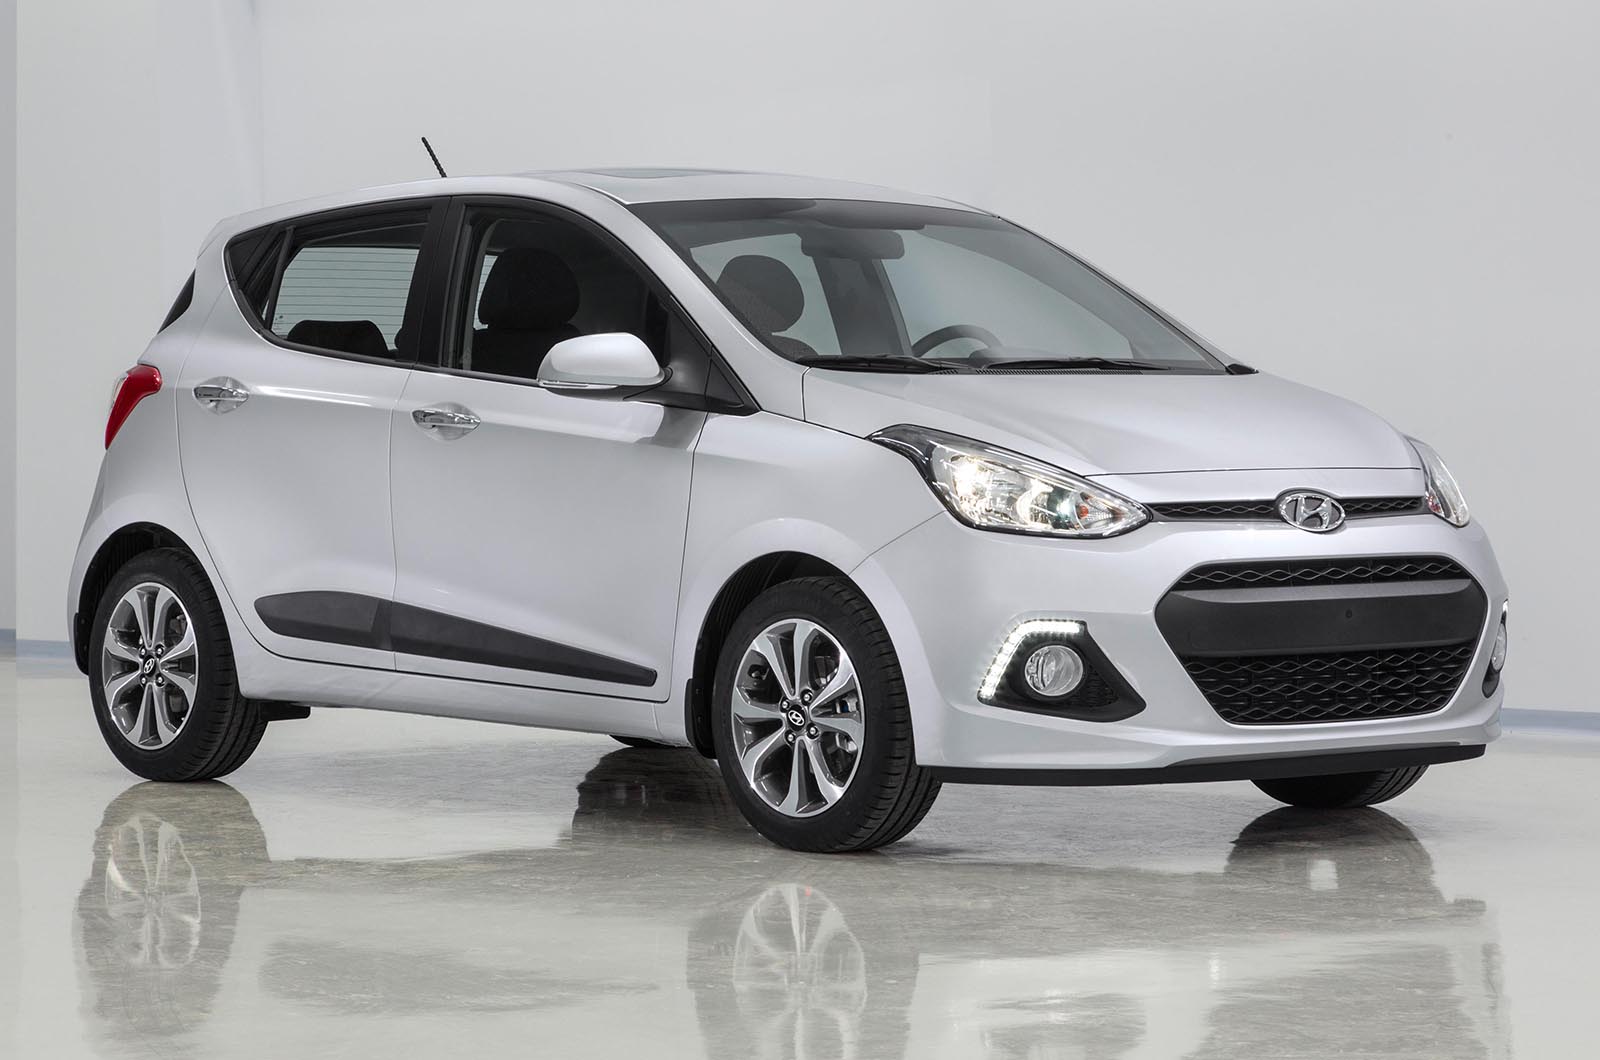 Hyundai Launches Grand i10 Automatic in India at Rs 5.64 lakh